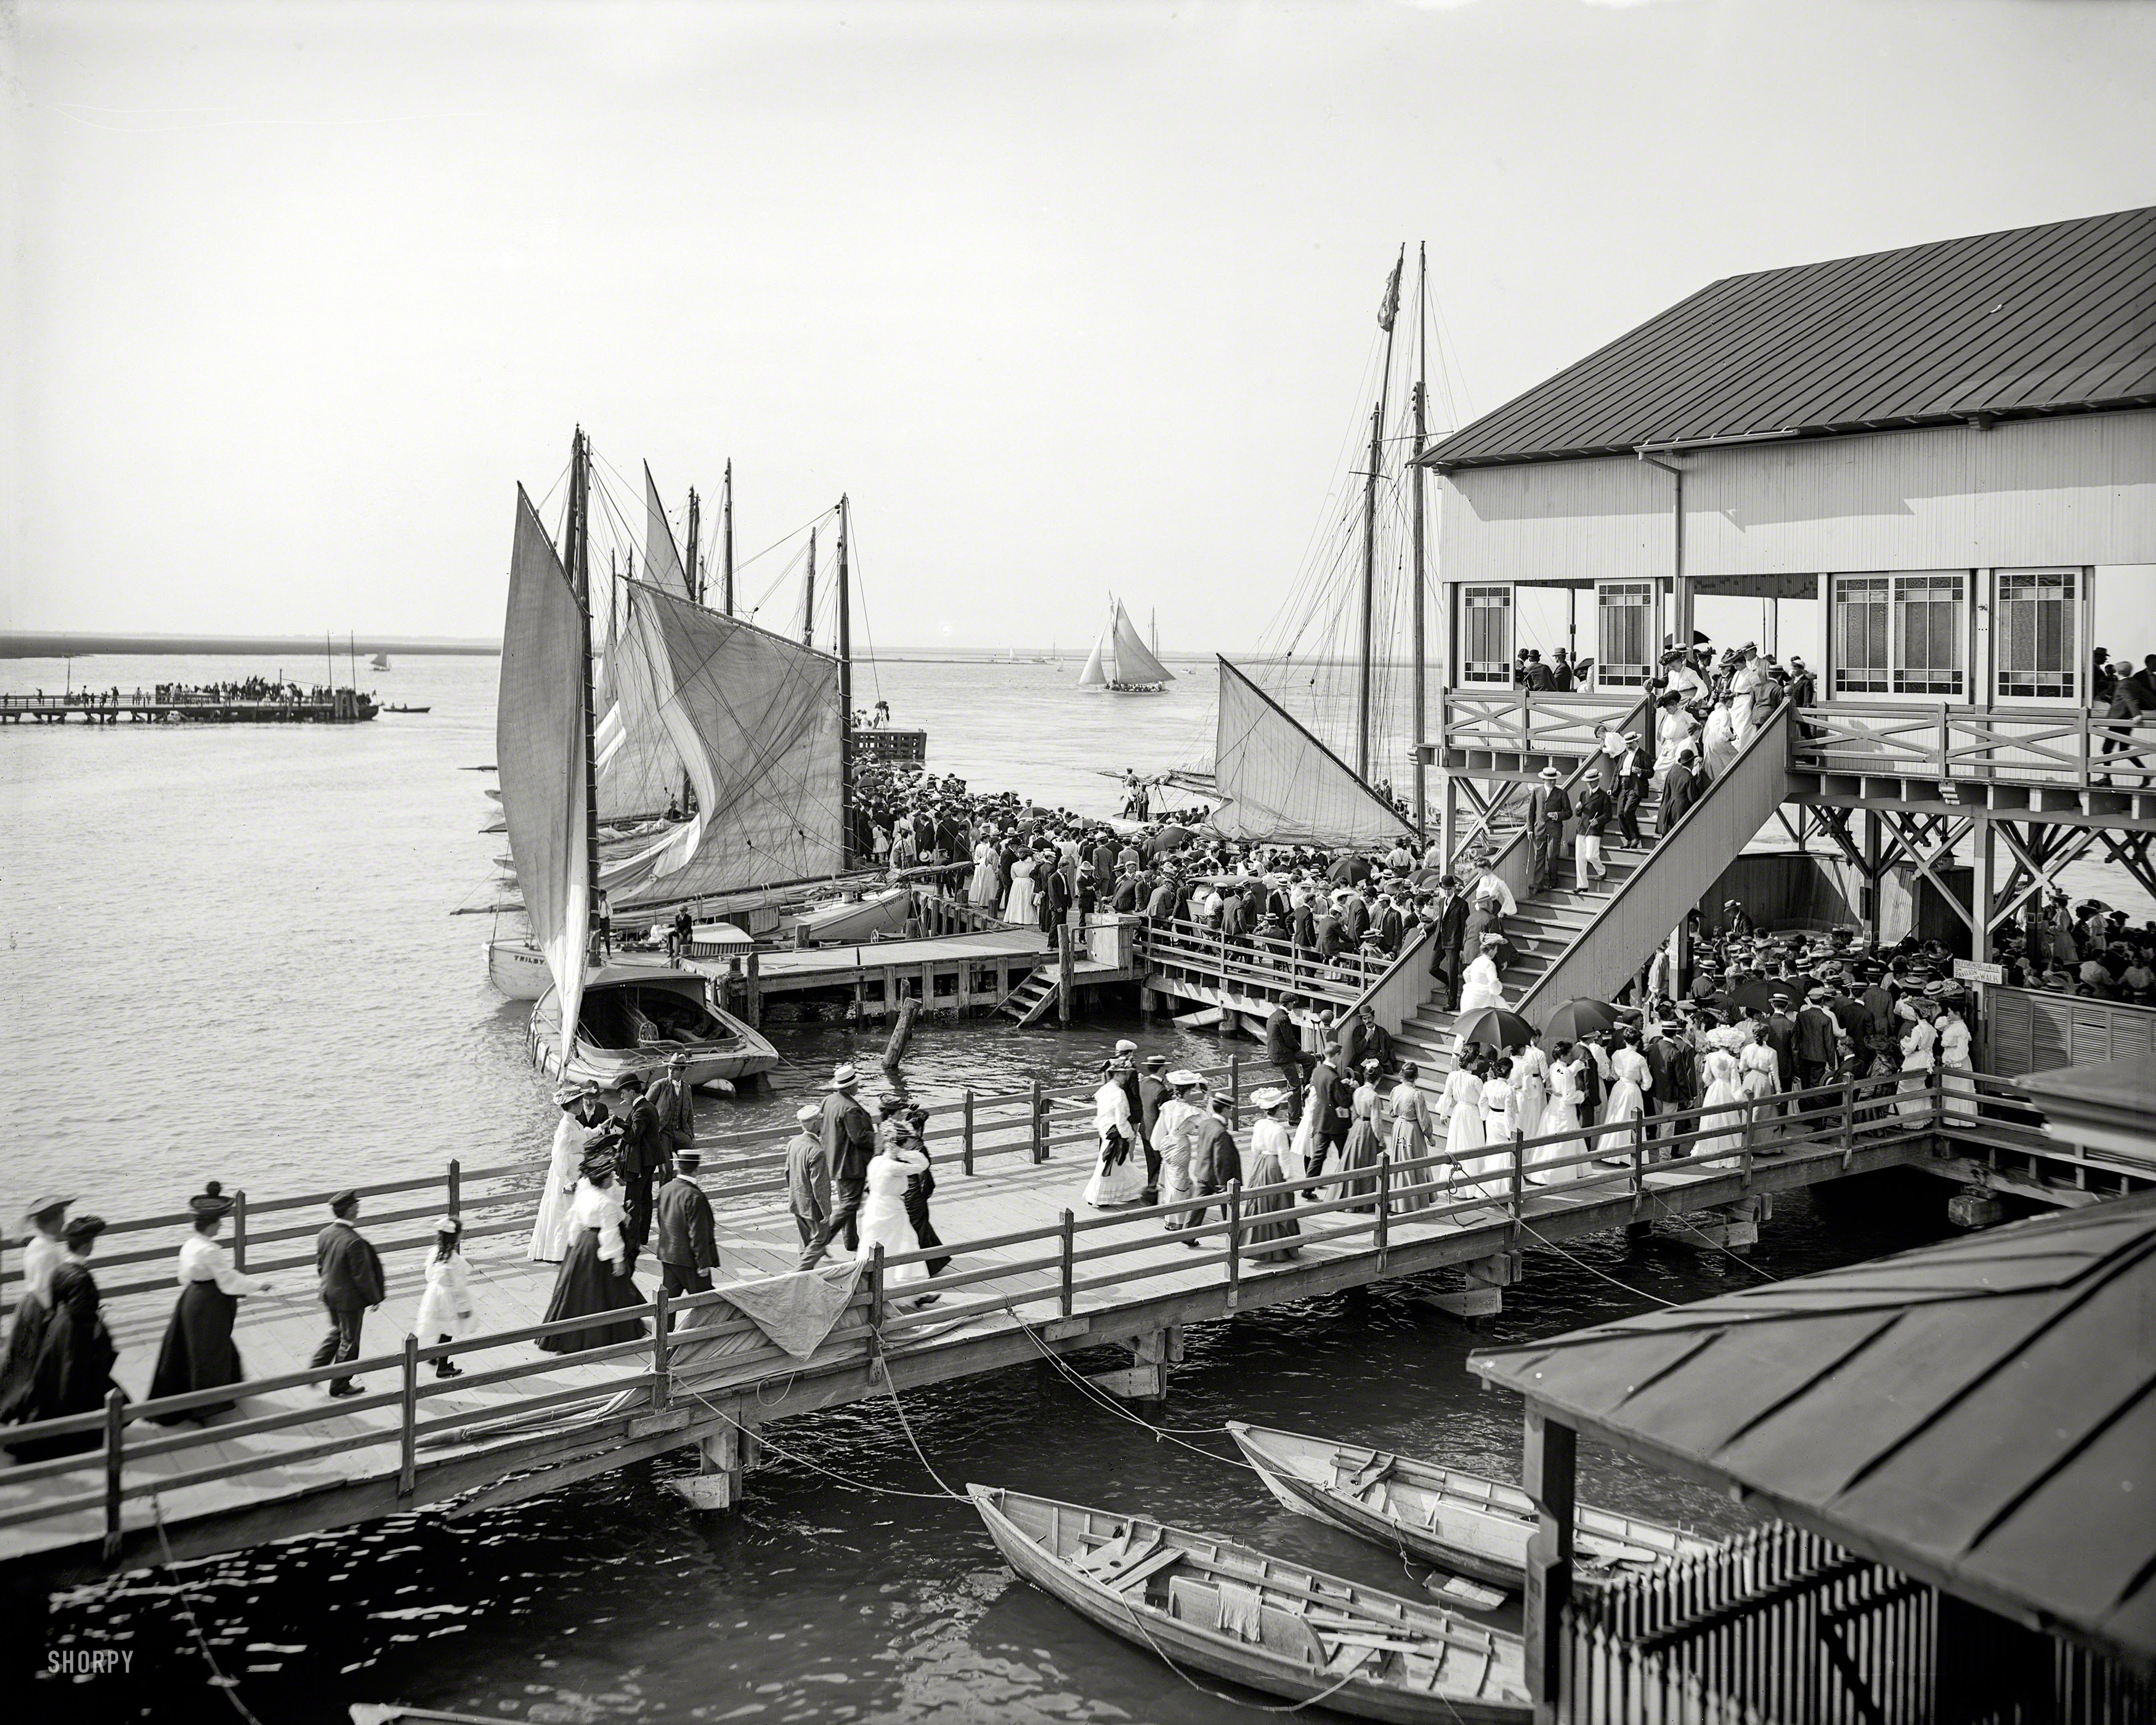 The Jersey Shore in 1904. "Pier at the inlet, Atlantic City." 8x10 inch dry plate glass negative, Detroit Publishing Company. View full size.